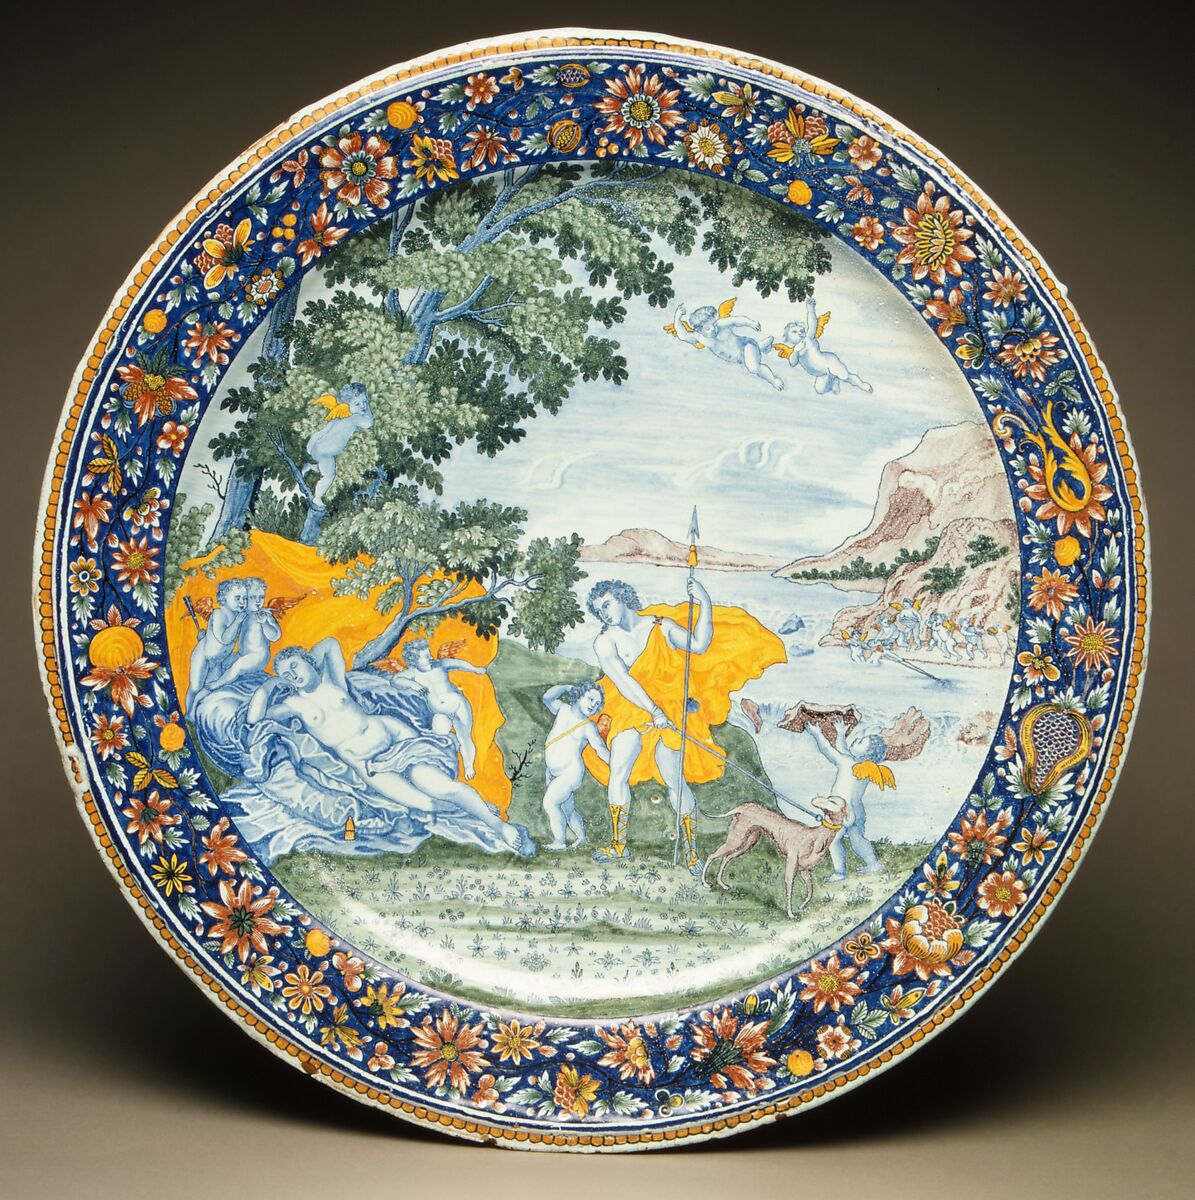 Plateau, Painted decoration by Claude Borne (French), Faience (tin-glazed earthenware), French, Rouen 